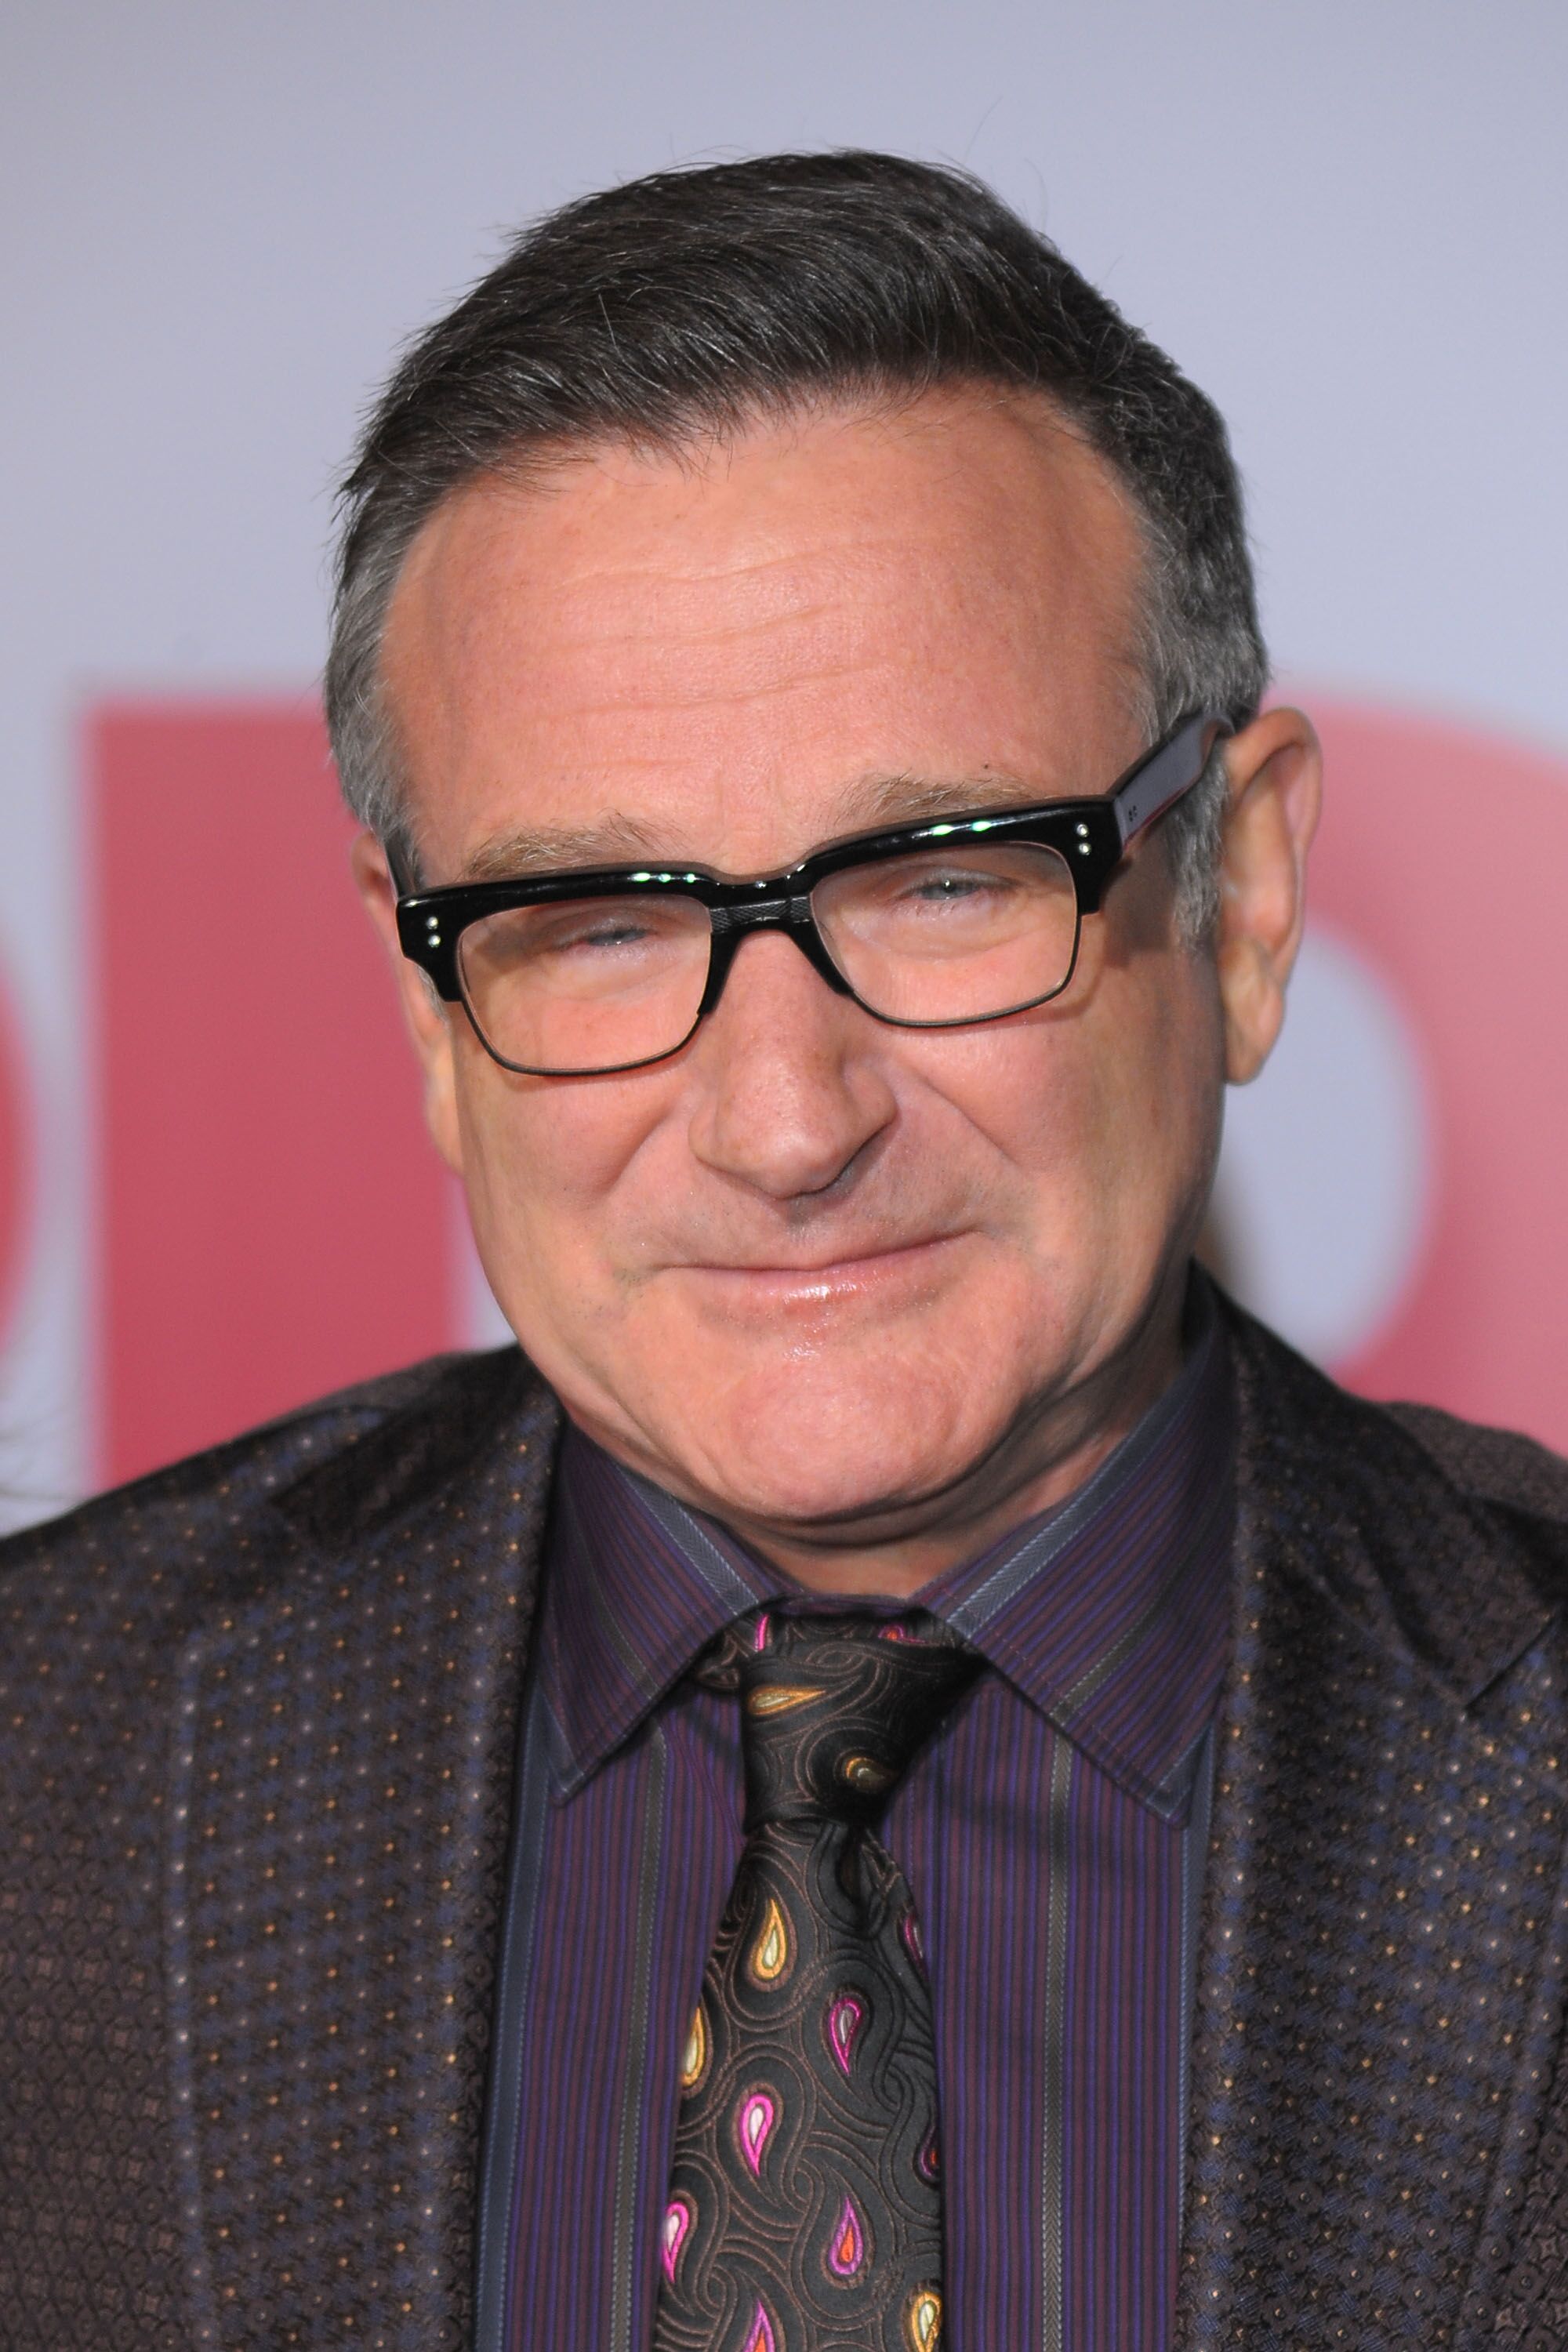 Robin Williams arrives at the premiere of Walt Disney Pictures' "Old Dogs." | Source: Getty Images